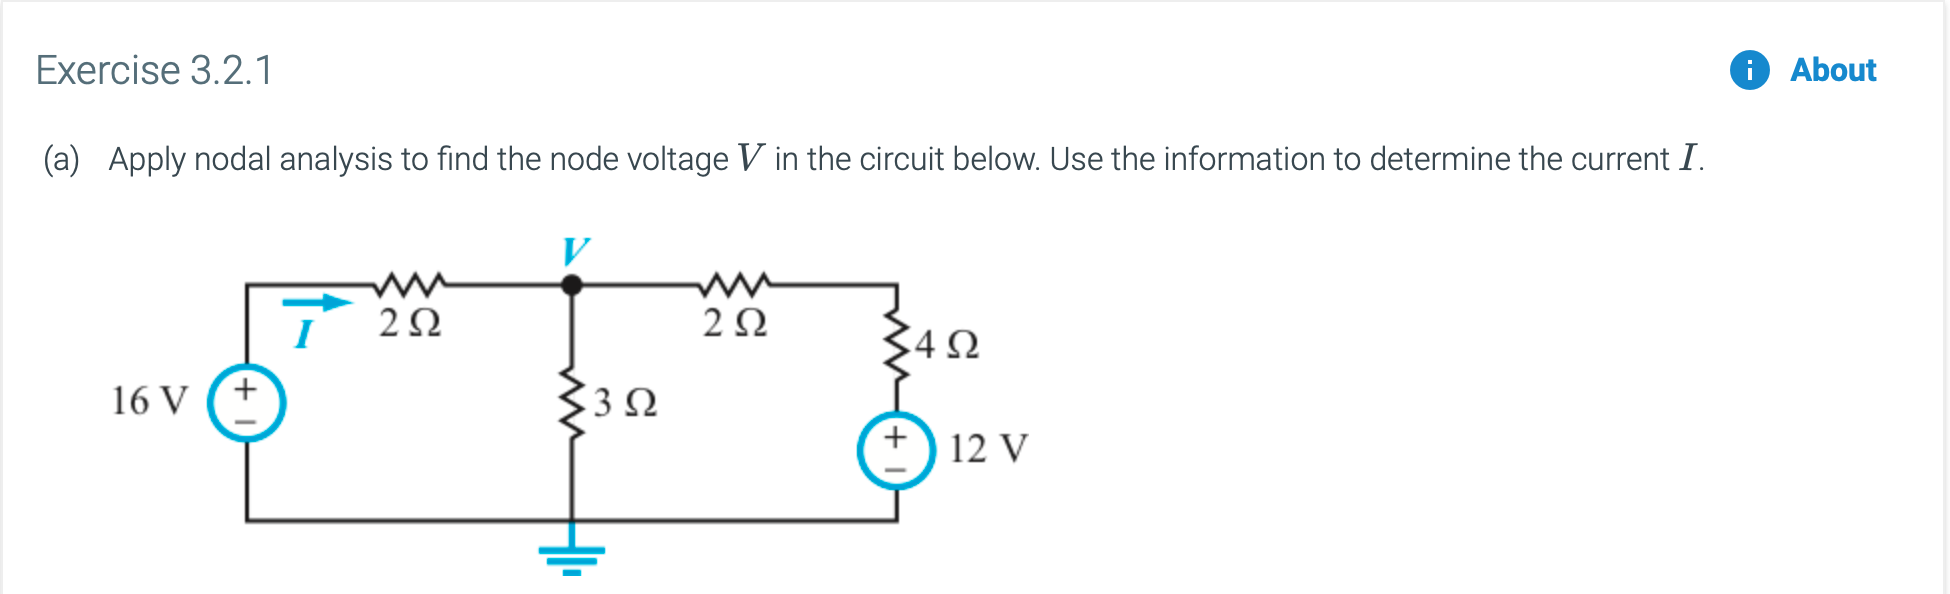 Exercise 3.2.1
About
Apply nodal analysis to find the node voltage V in the circuit below. Use the information to determine the current I.
(a)
w-
2Ω
2Ω
4Ω
3Ω
16 V
12 V
